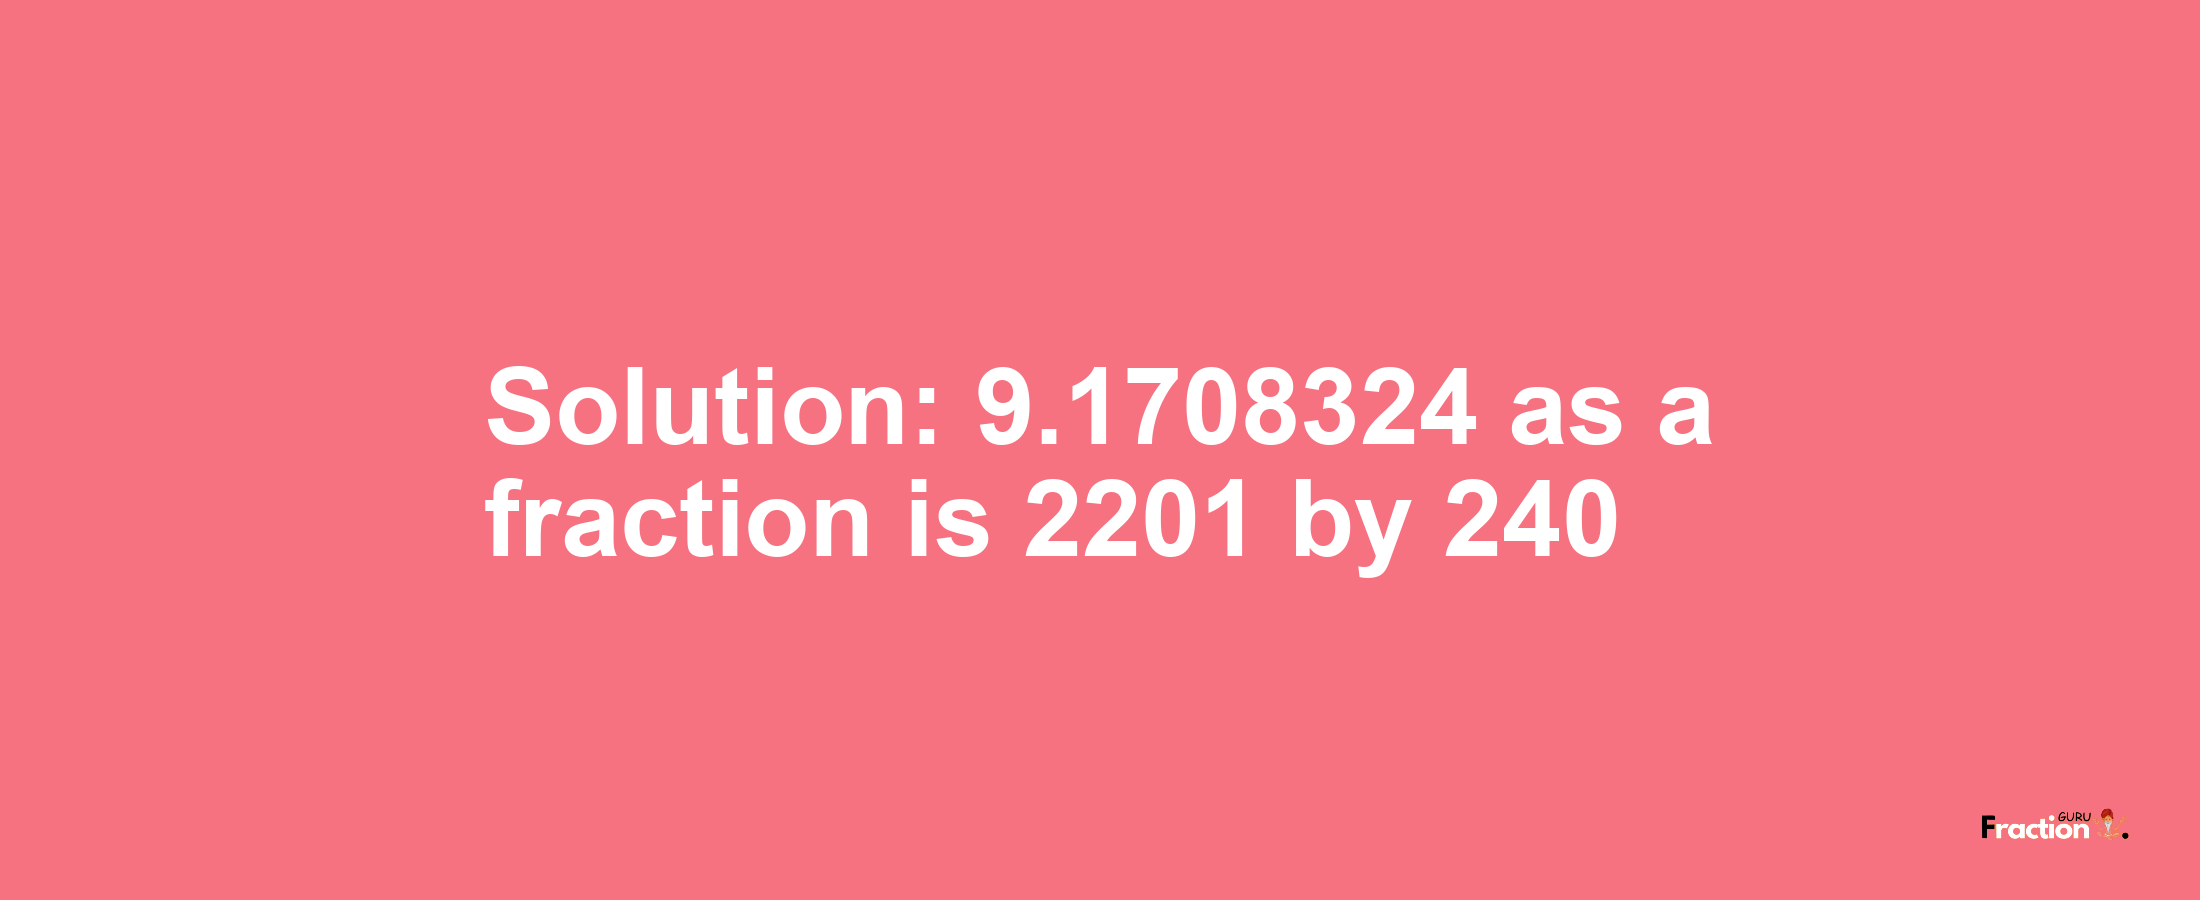 Solution:9.1708324 as a fraction is 2201/240